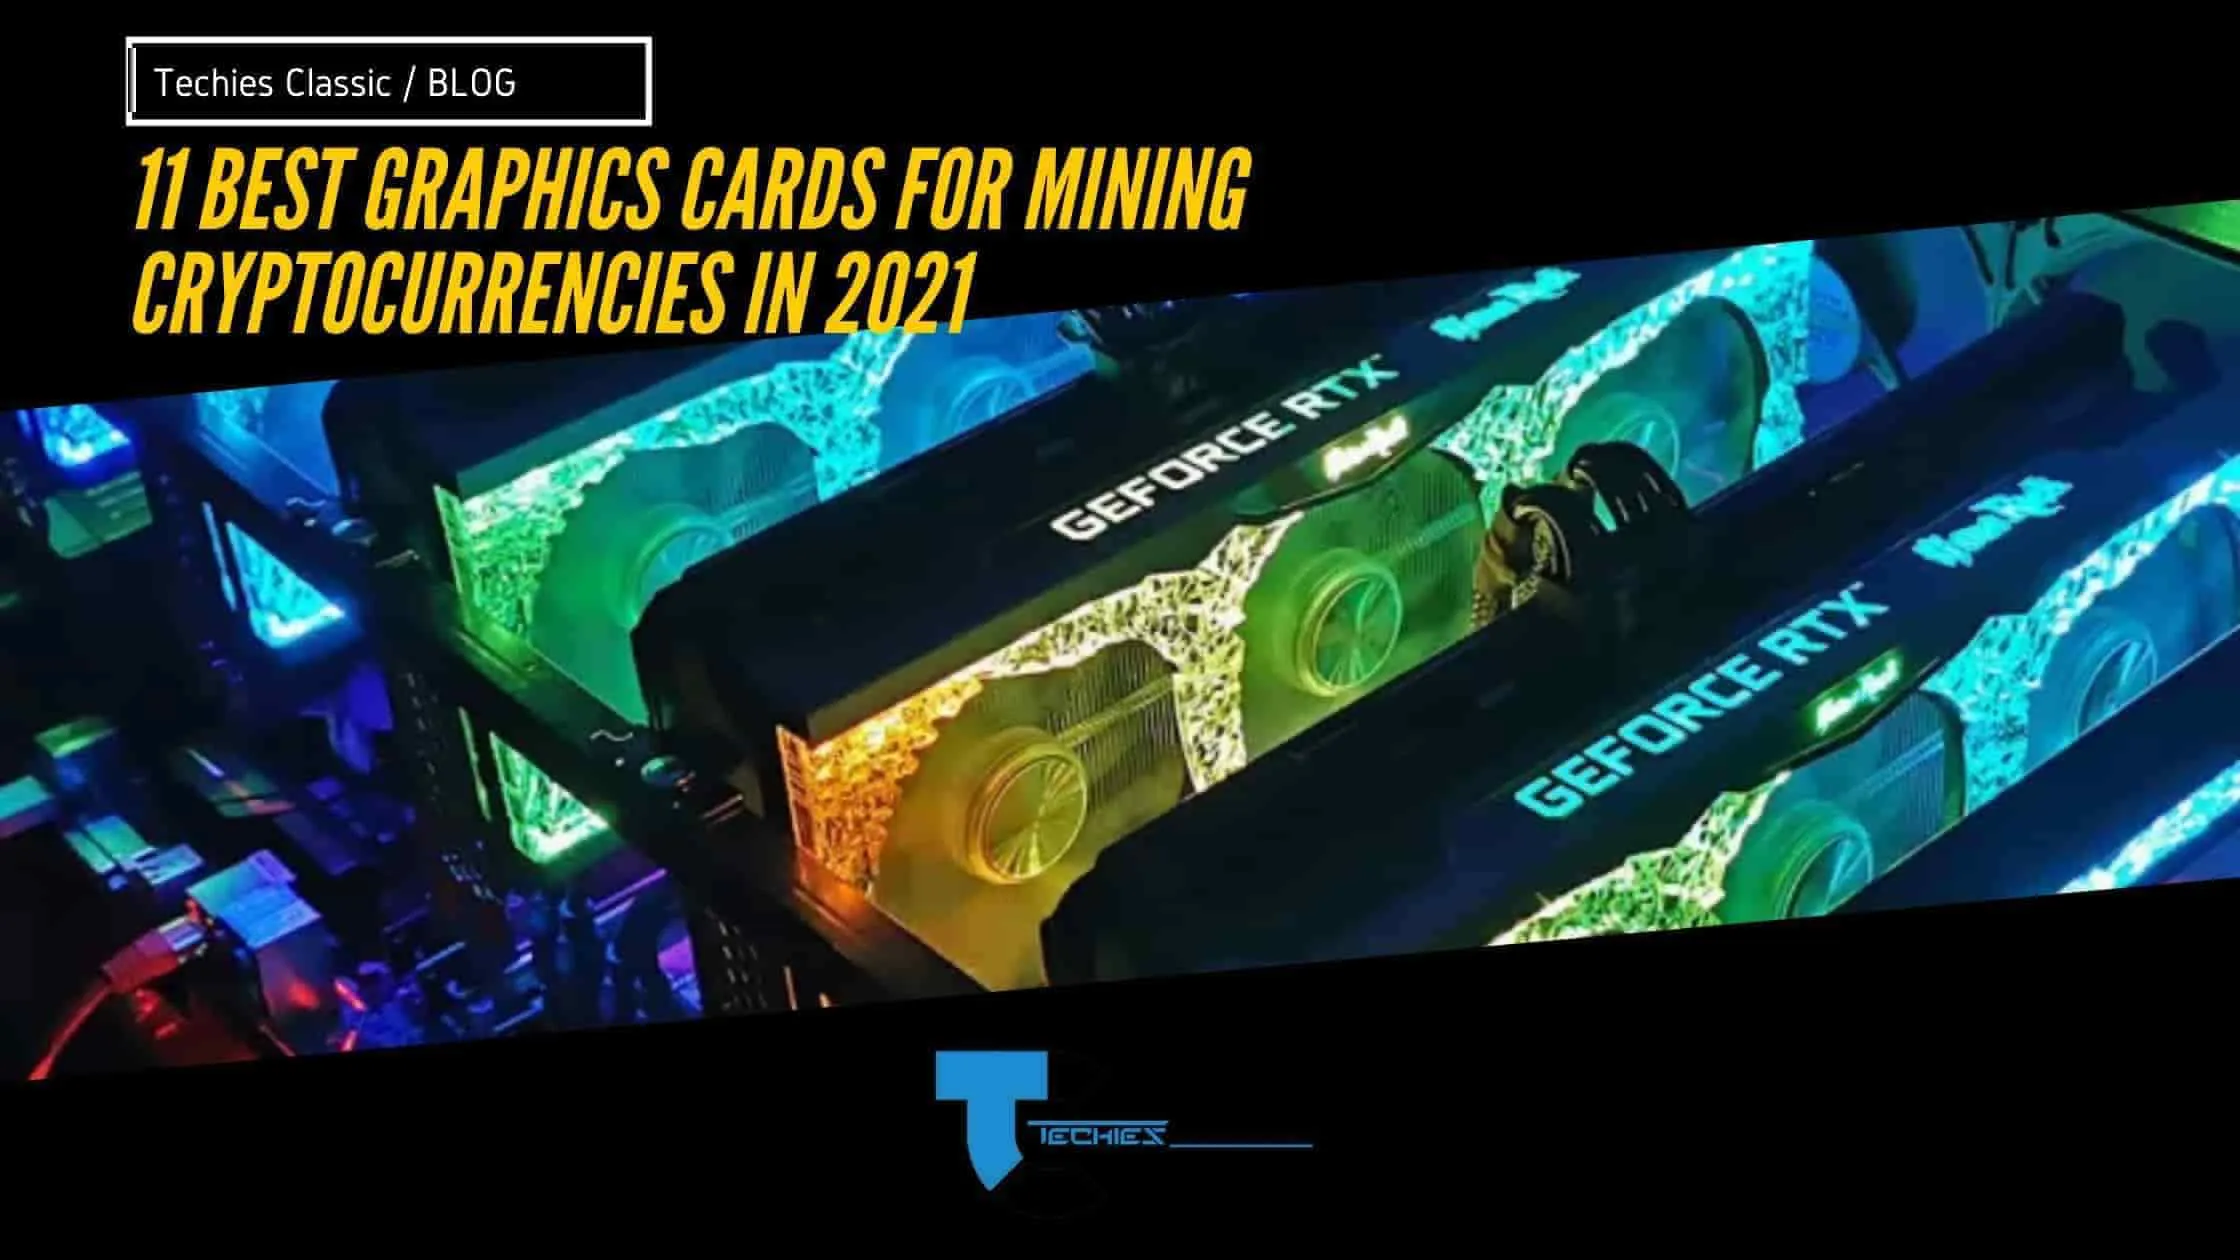 10 best graphics cards for mining cryptocurrencies in 2023